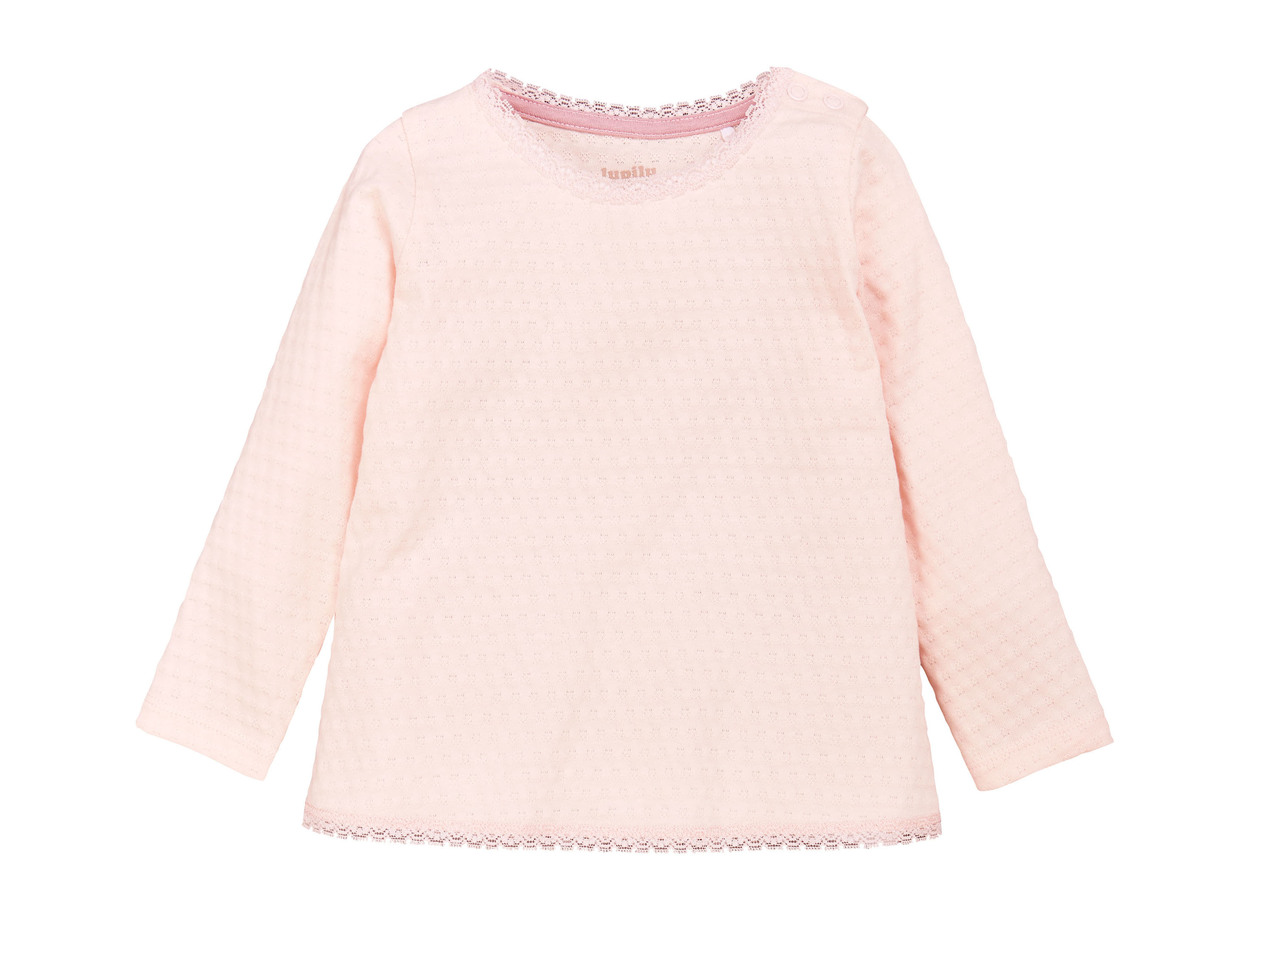 Baby Girls' Long-Sleeved Top